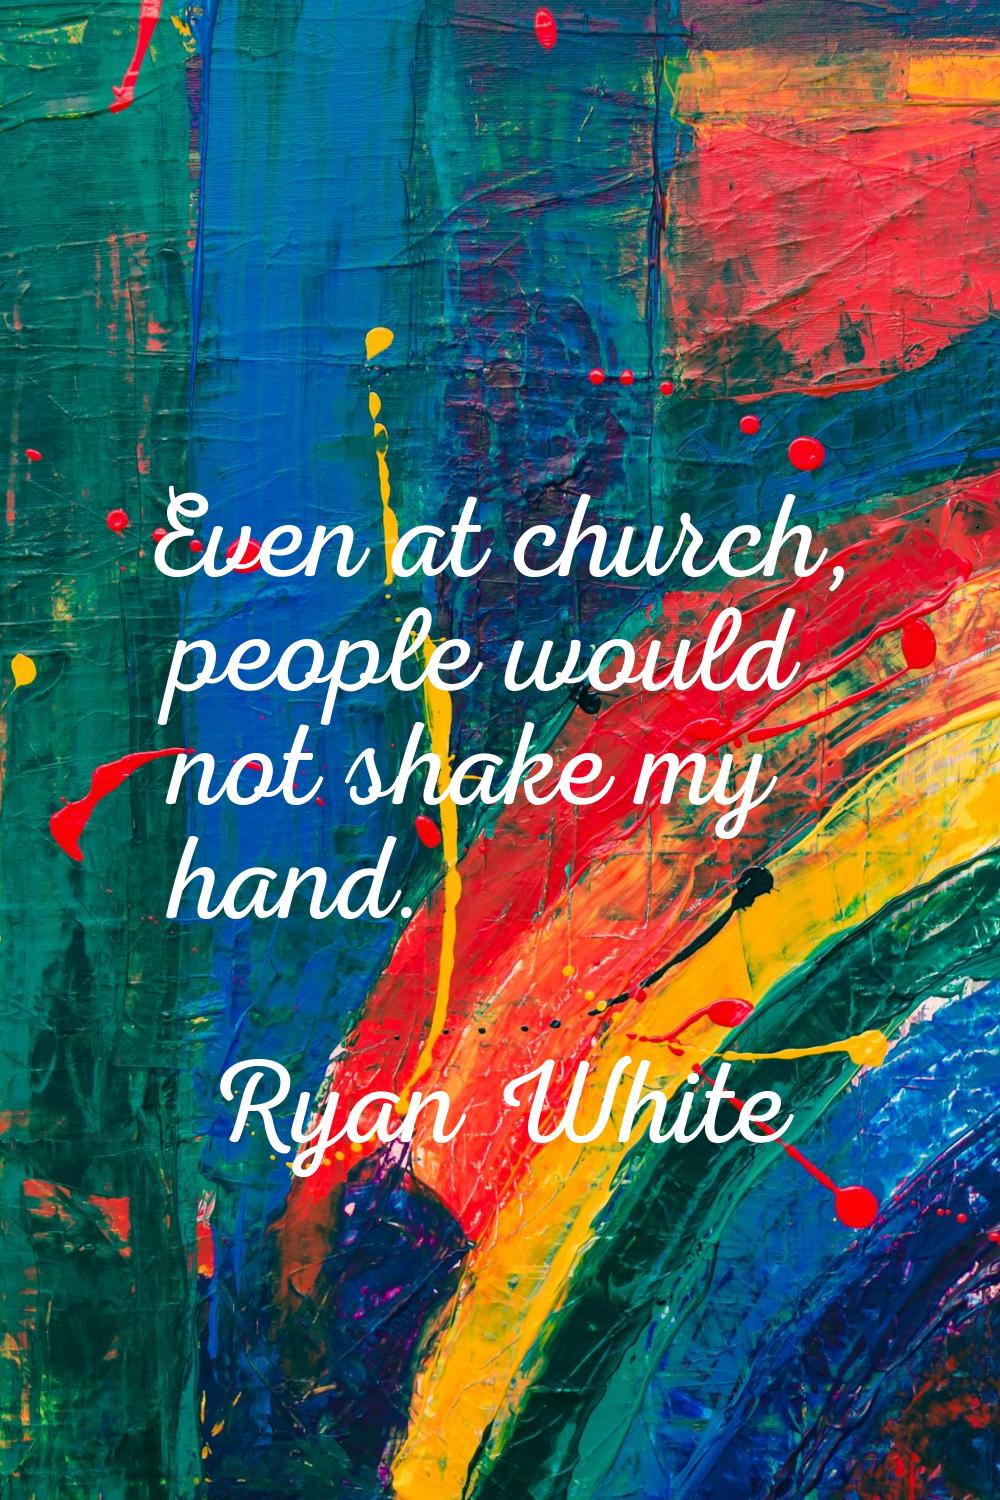 Even at church, people would not shake my hand.